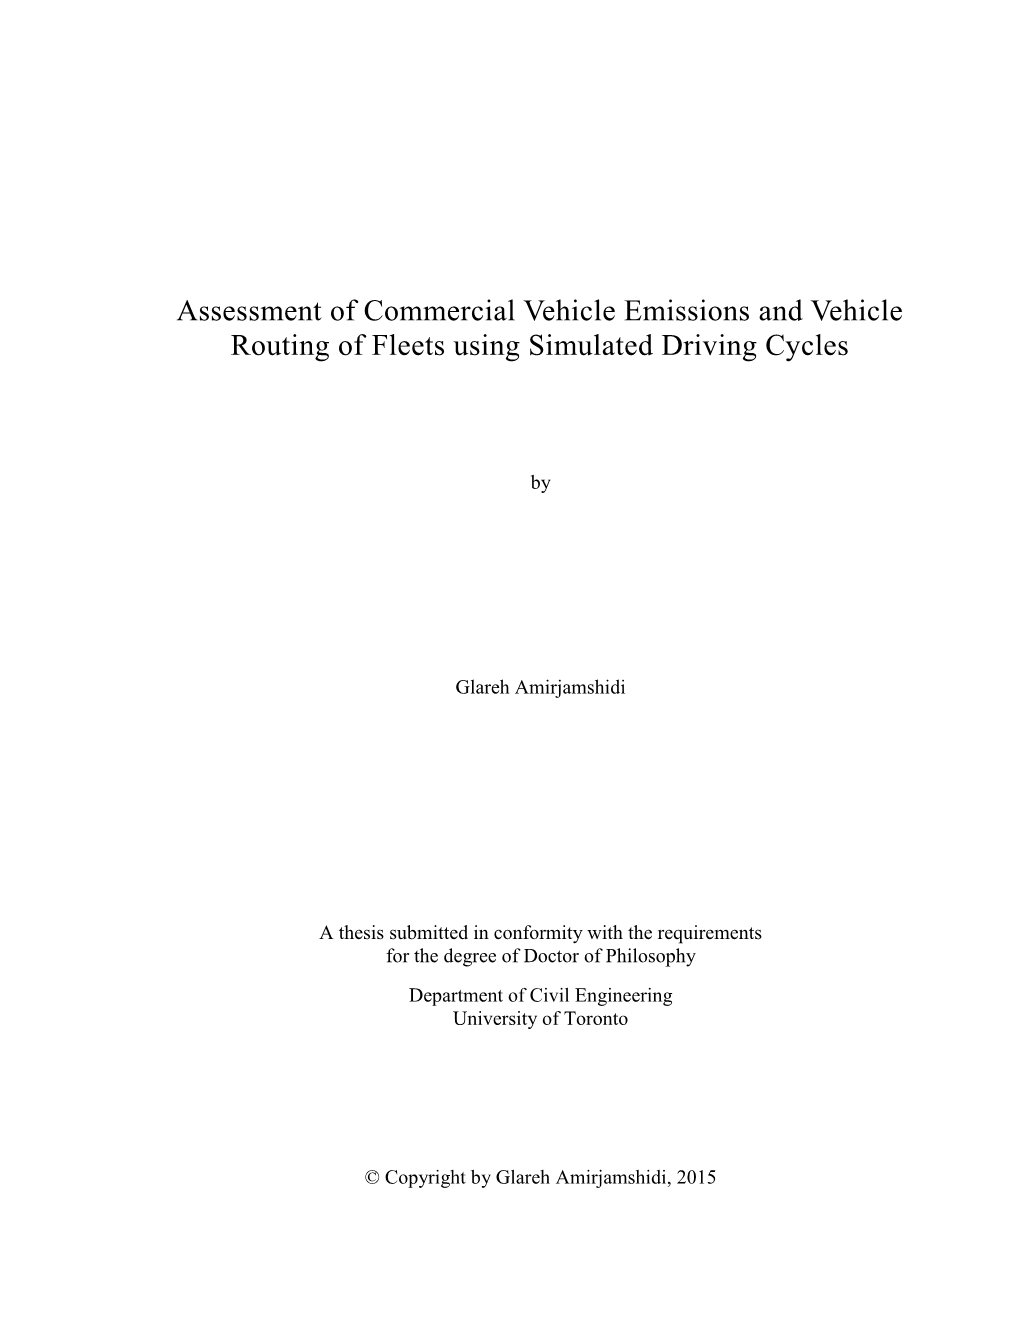 Assessment of Commercial Vehicle Emissions and Vehicle Routing of Fleets Using Simulated Driving Cycles